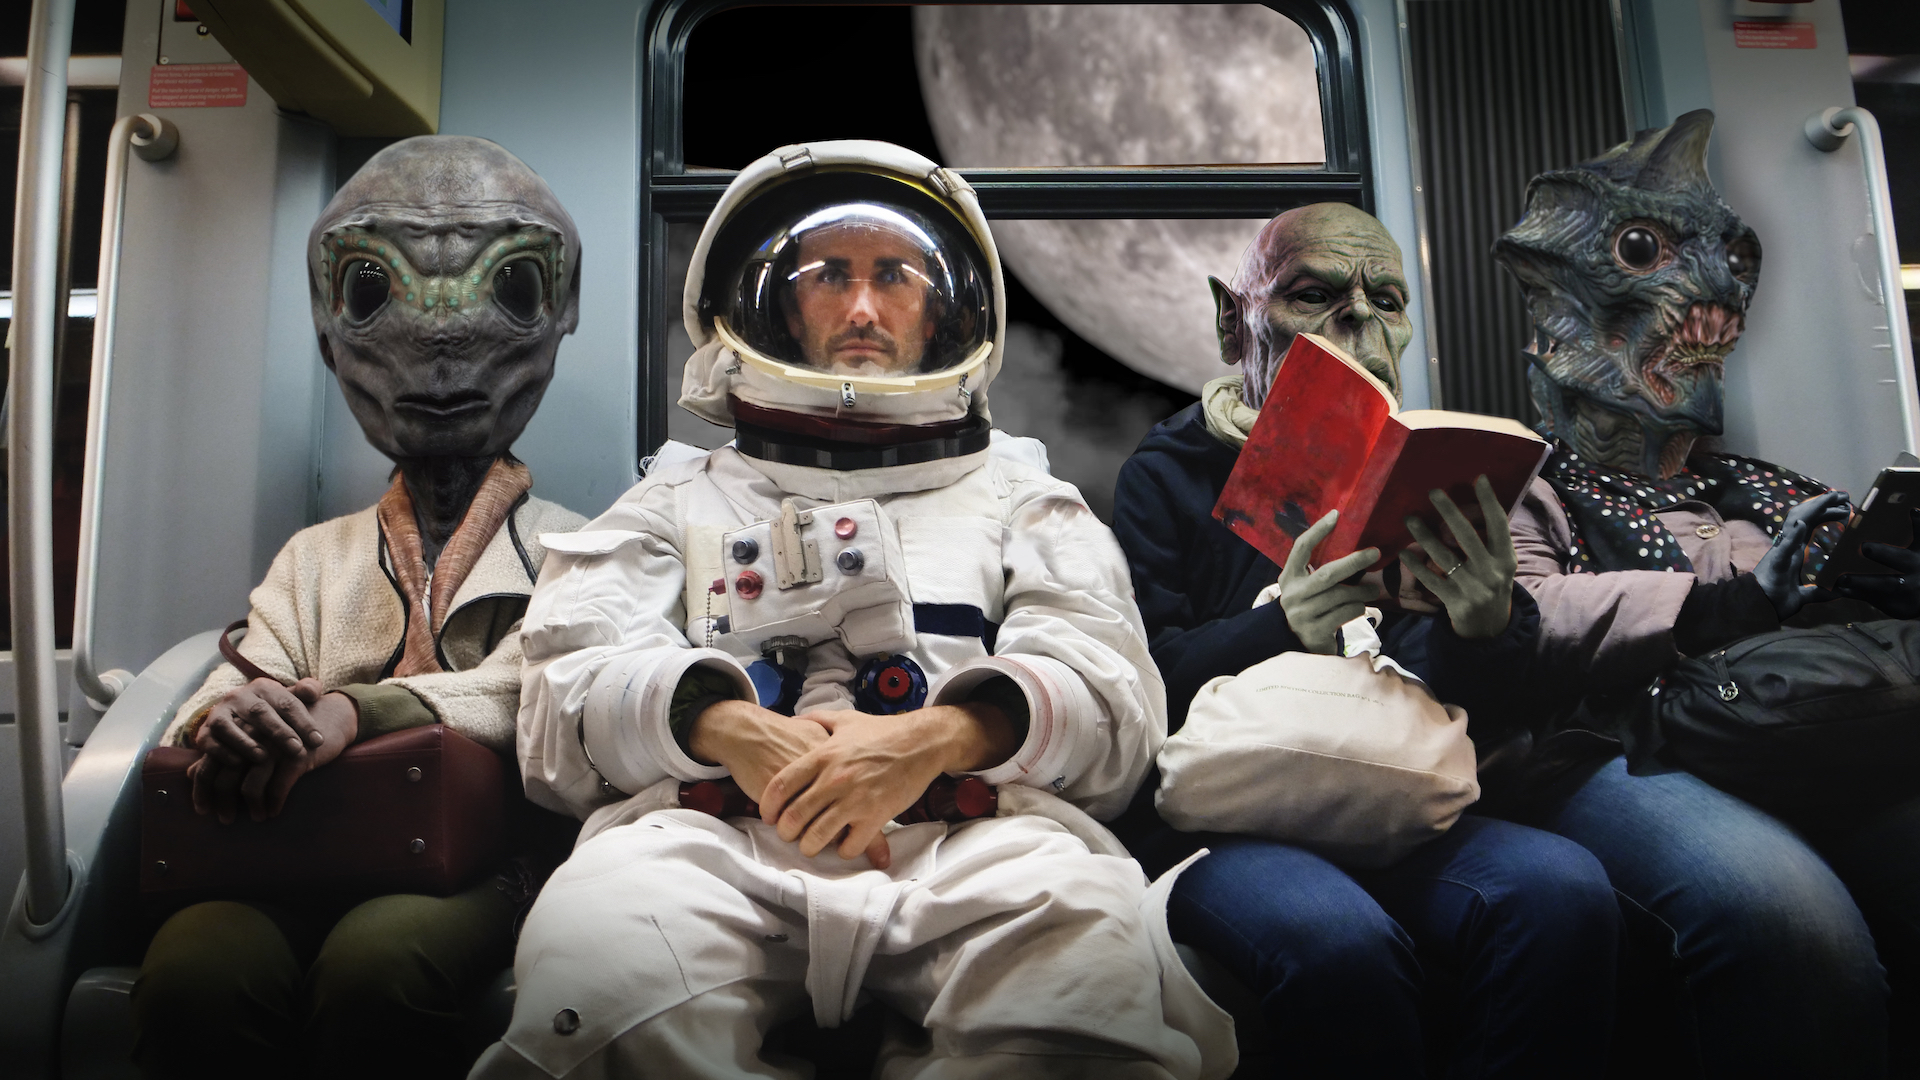 An astronaut and three aliens sitting on a train going to the moon